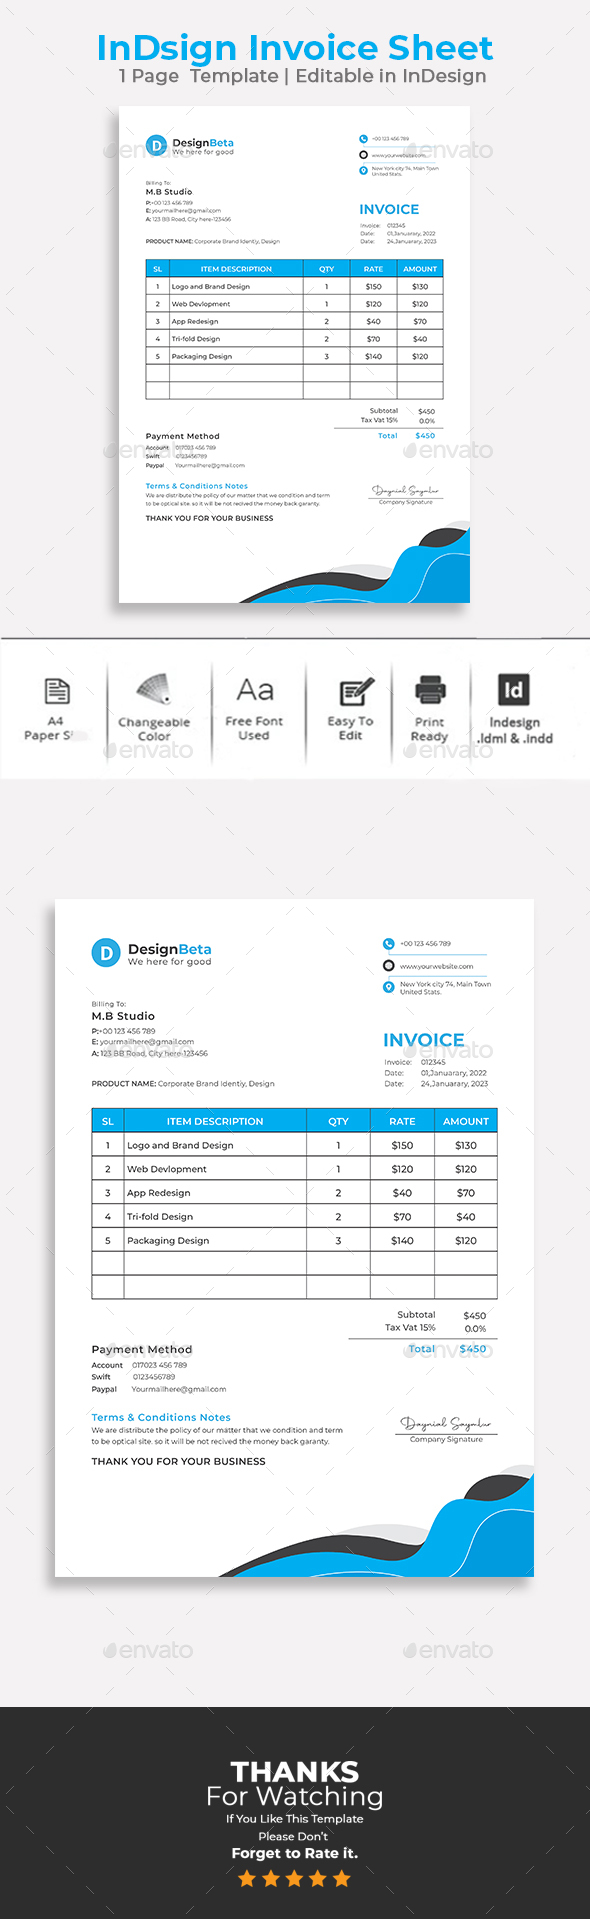 Invoice Template | InDesign